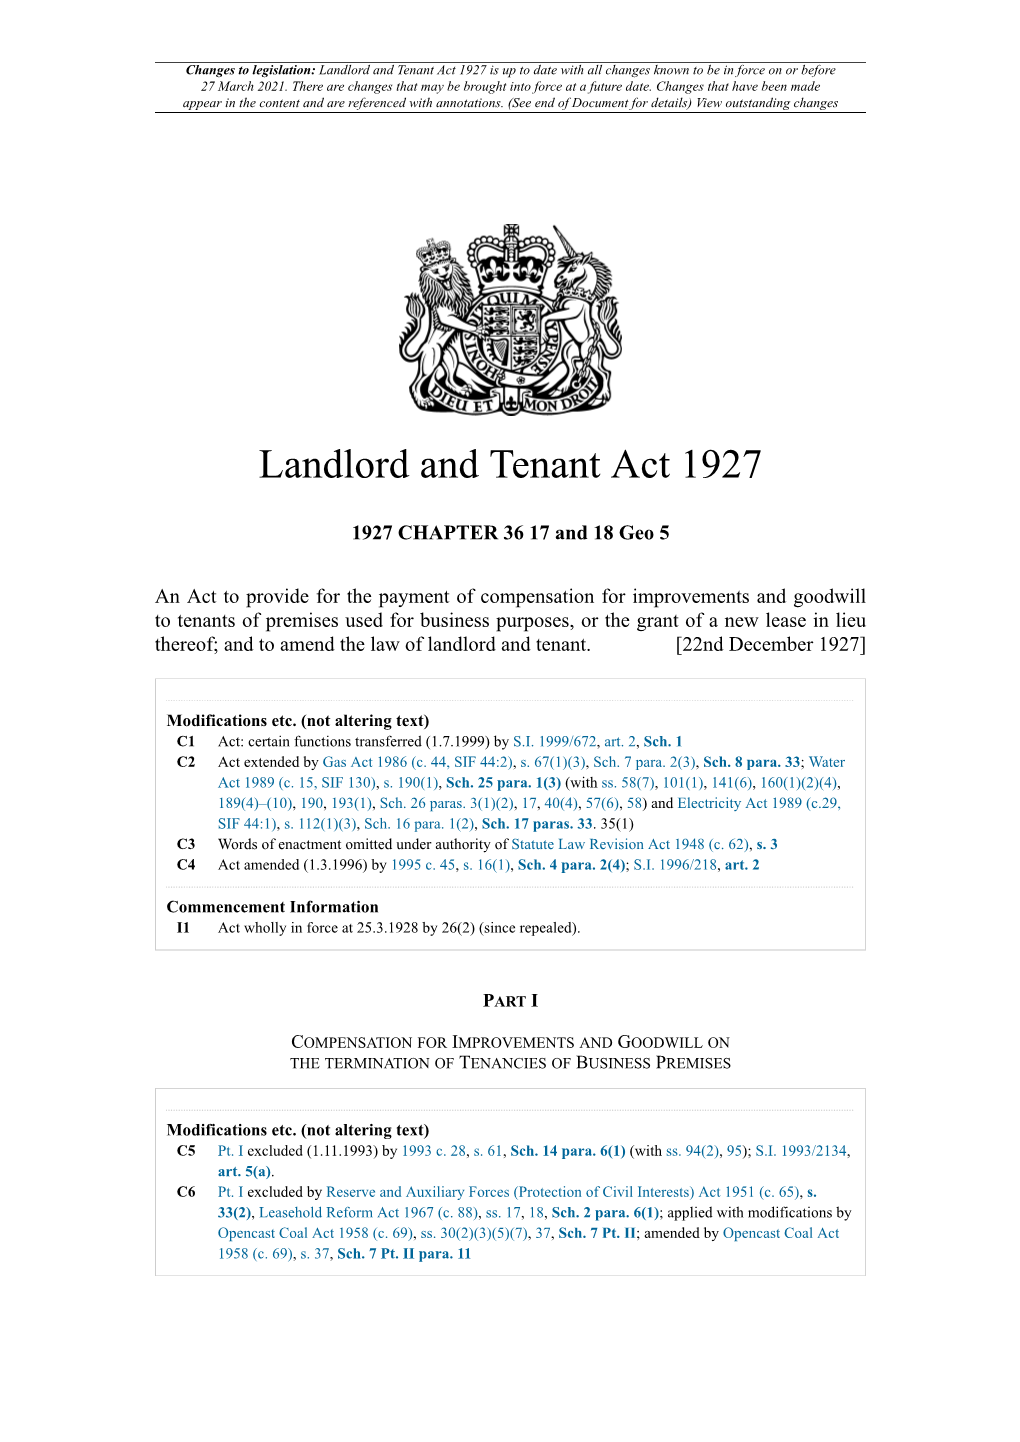 Landlord and Tenant Act 1927 Is up to Date with All Changes Known to Be in Force on Or Before 27 March 2021